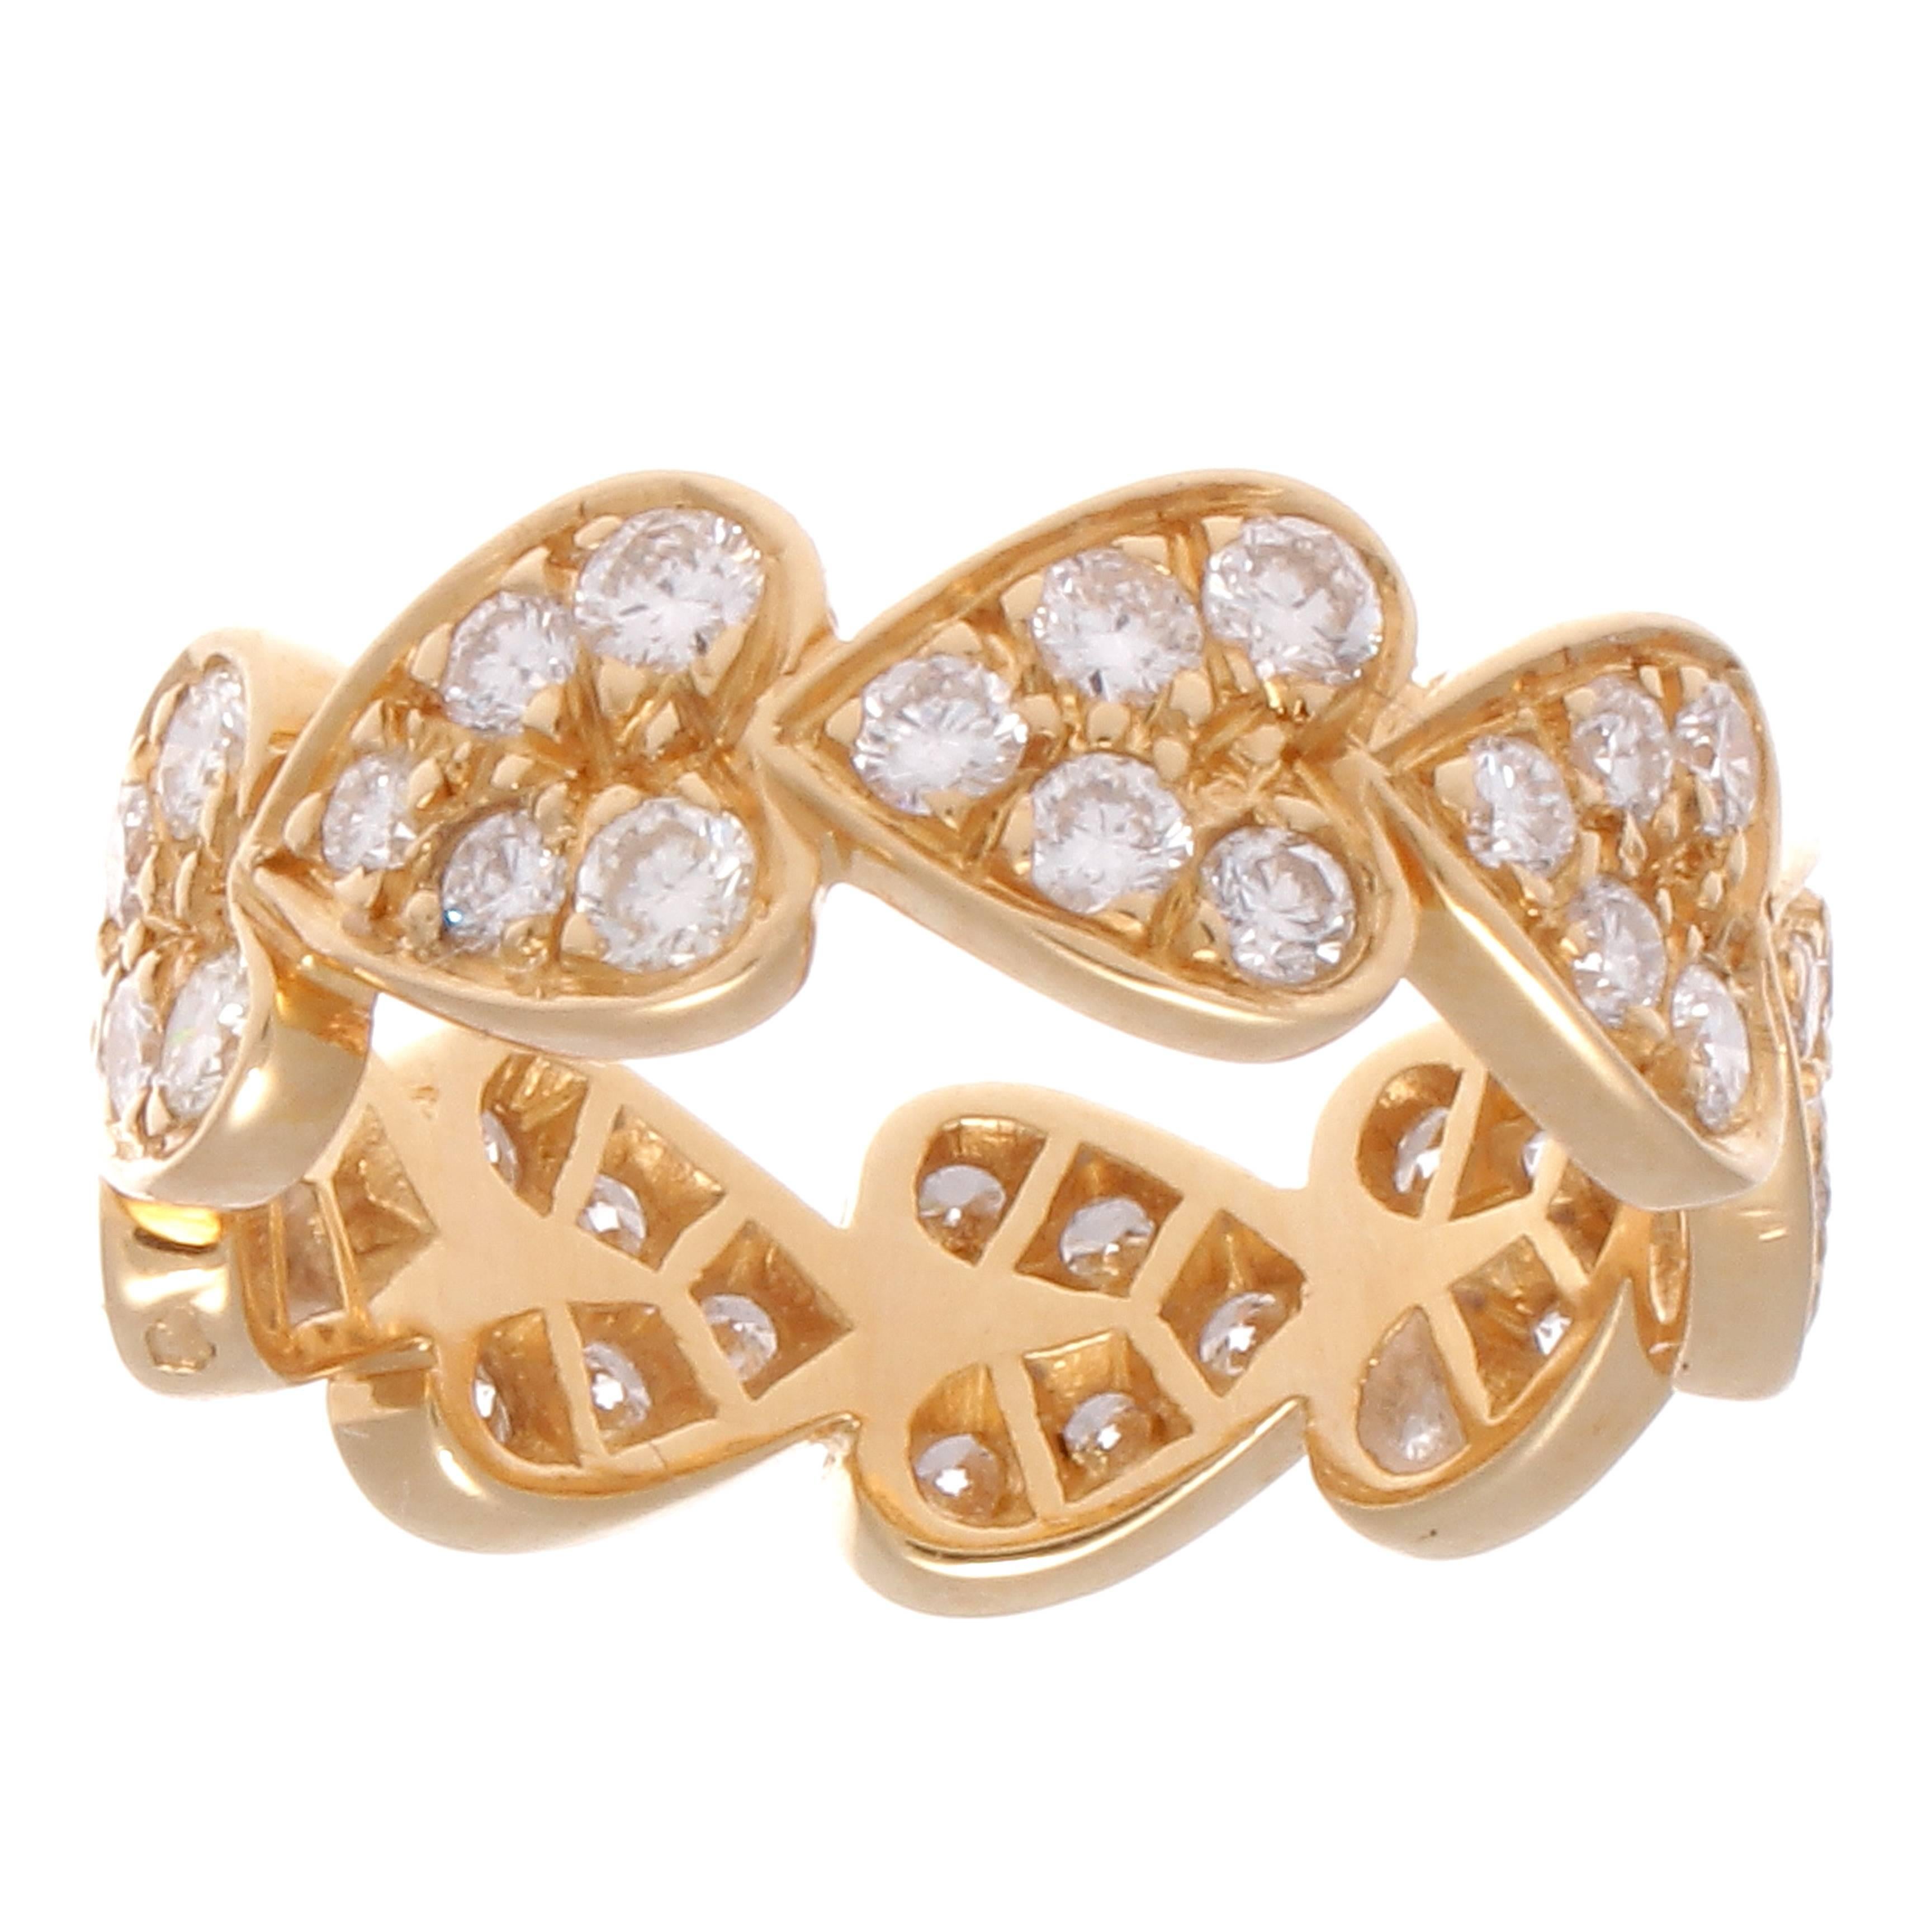 A creation of passion from Cartier. The circle of hearts and diamonds representing promises fulfilled. Crafted in 18k yellow gold. Signed Cartier, numbered and stamped with French hallmarks.

Ring size 6-1/4.